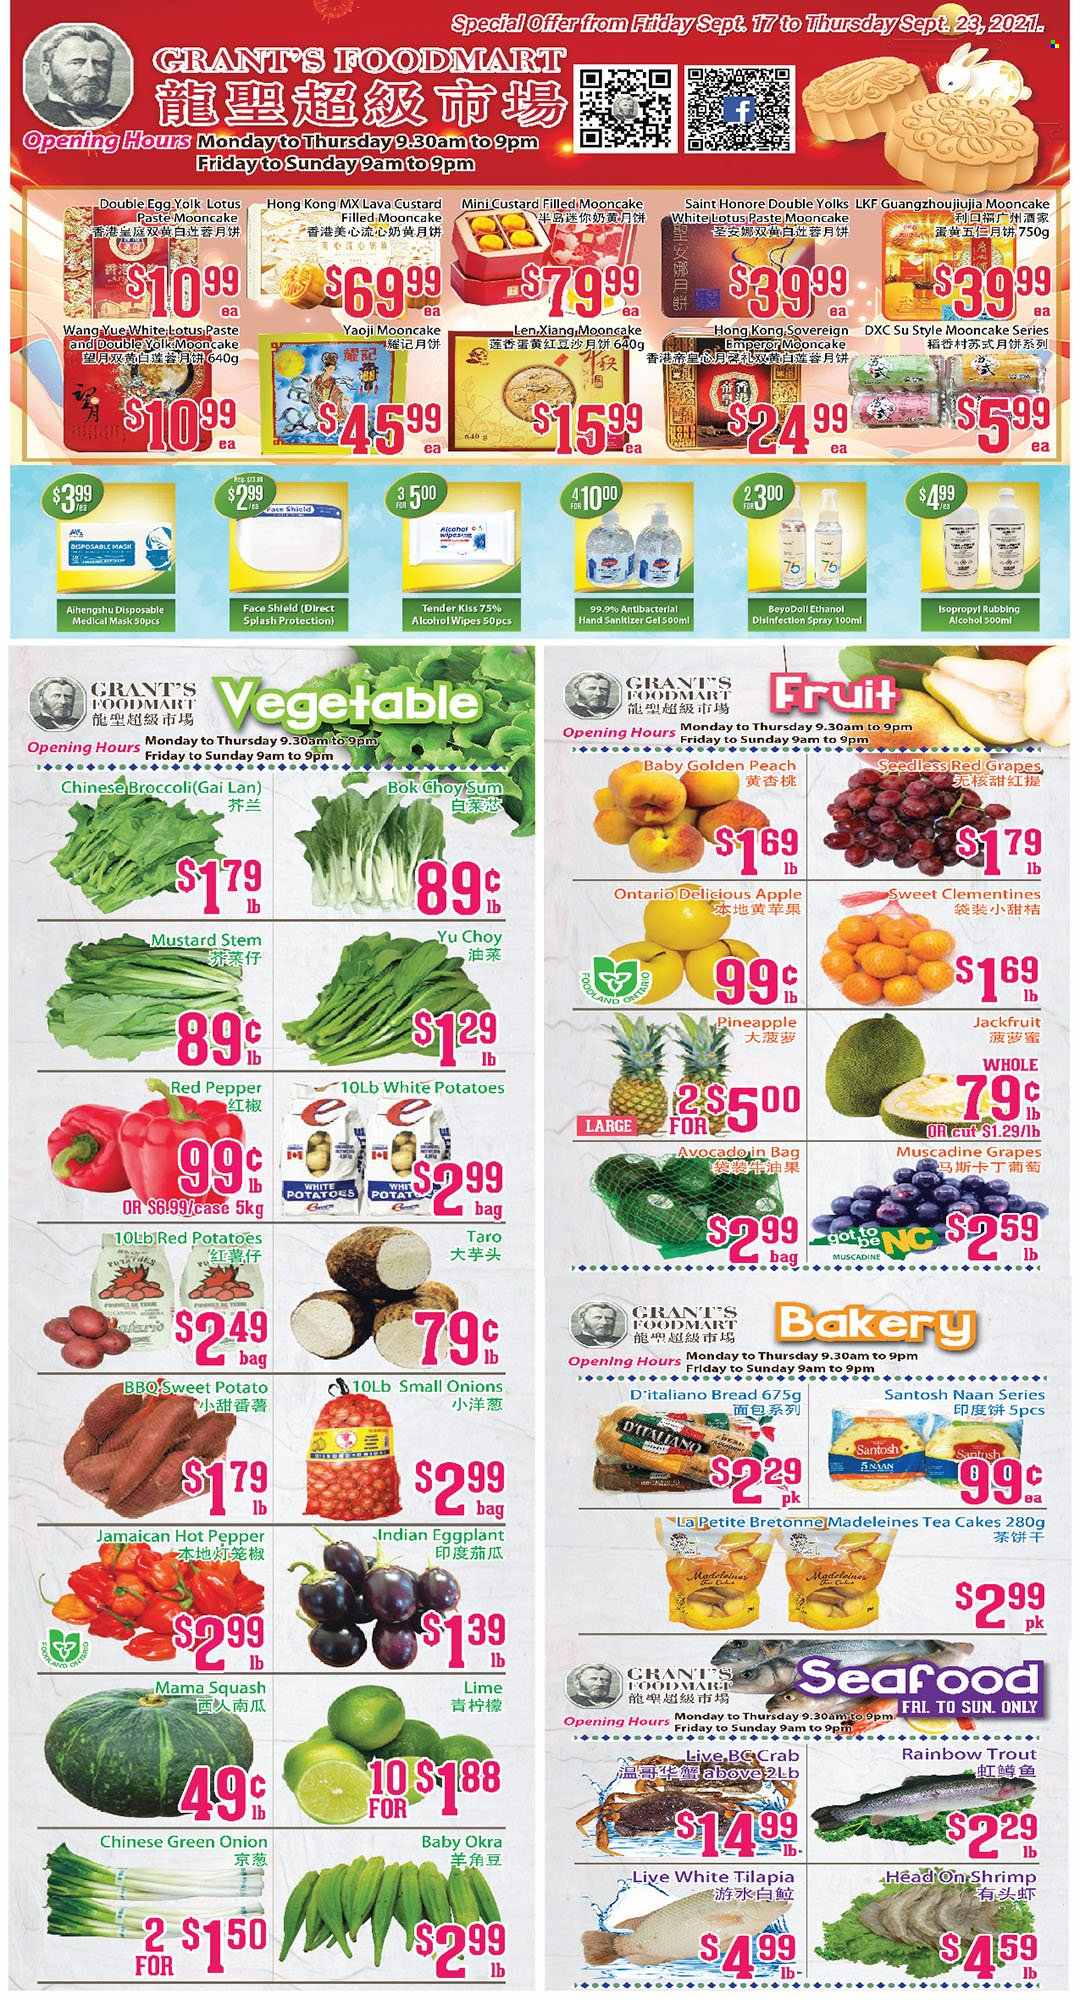 thumbnail - Grant's Foodmart Flyer - September 17, 2021 - September 23, 2021 - Sales products - bread, cake, bok choy, broccoli, sweet potato, potatoes, okra, onion, eggplant, green onion, red potatoes, avocado, clementines, grapes, pineapple, tilapia, trout, seafood, shrimps, custard, eggs, mustard, tea, Grant's, Lotus, hand sanitizer, disposable mask, chinese broccoli. Page 1.